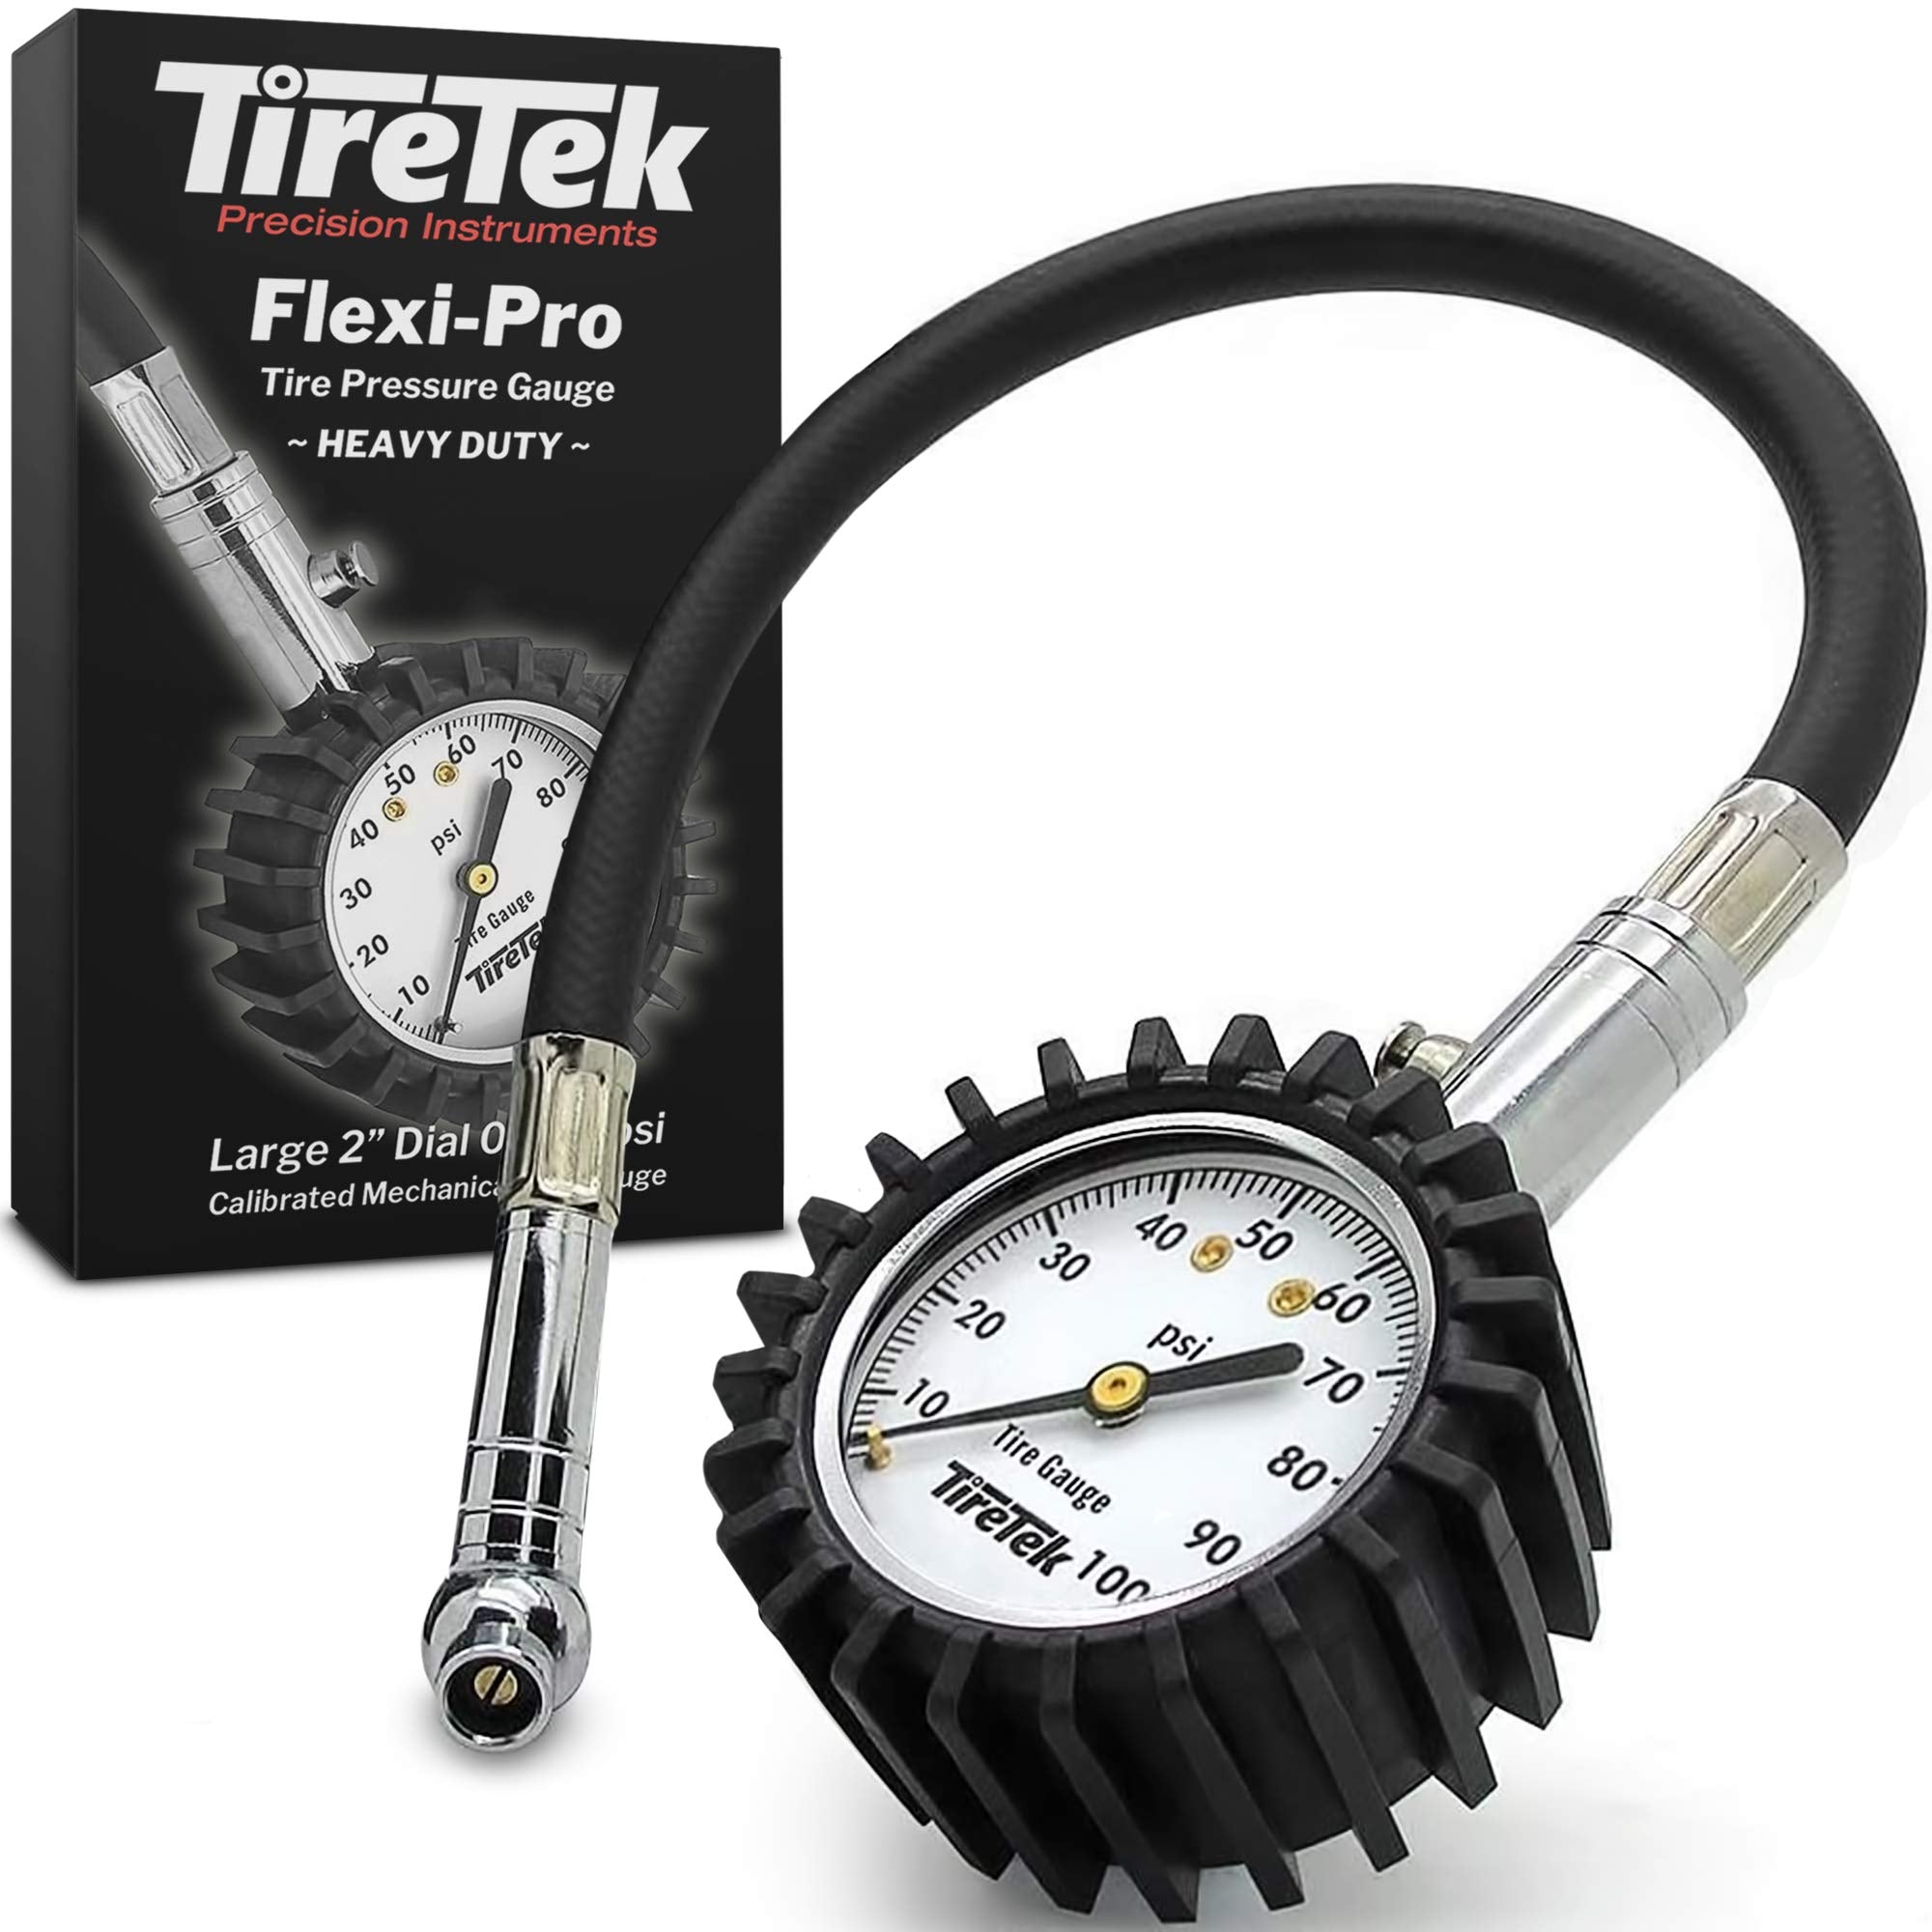 TireTek Motorcycle Tire Pressure Gauge 0-100 PSI Tire Gauge with Flexible  Air Chuck and ANSI B40.1 Accuracy for Motorcycle, Bike, ATV, Car, and SUV  $16.99